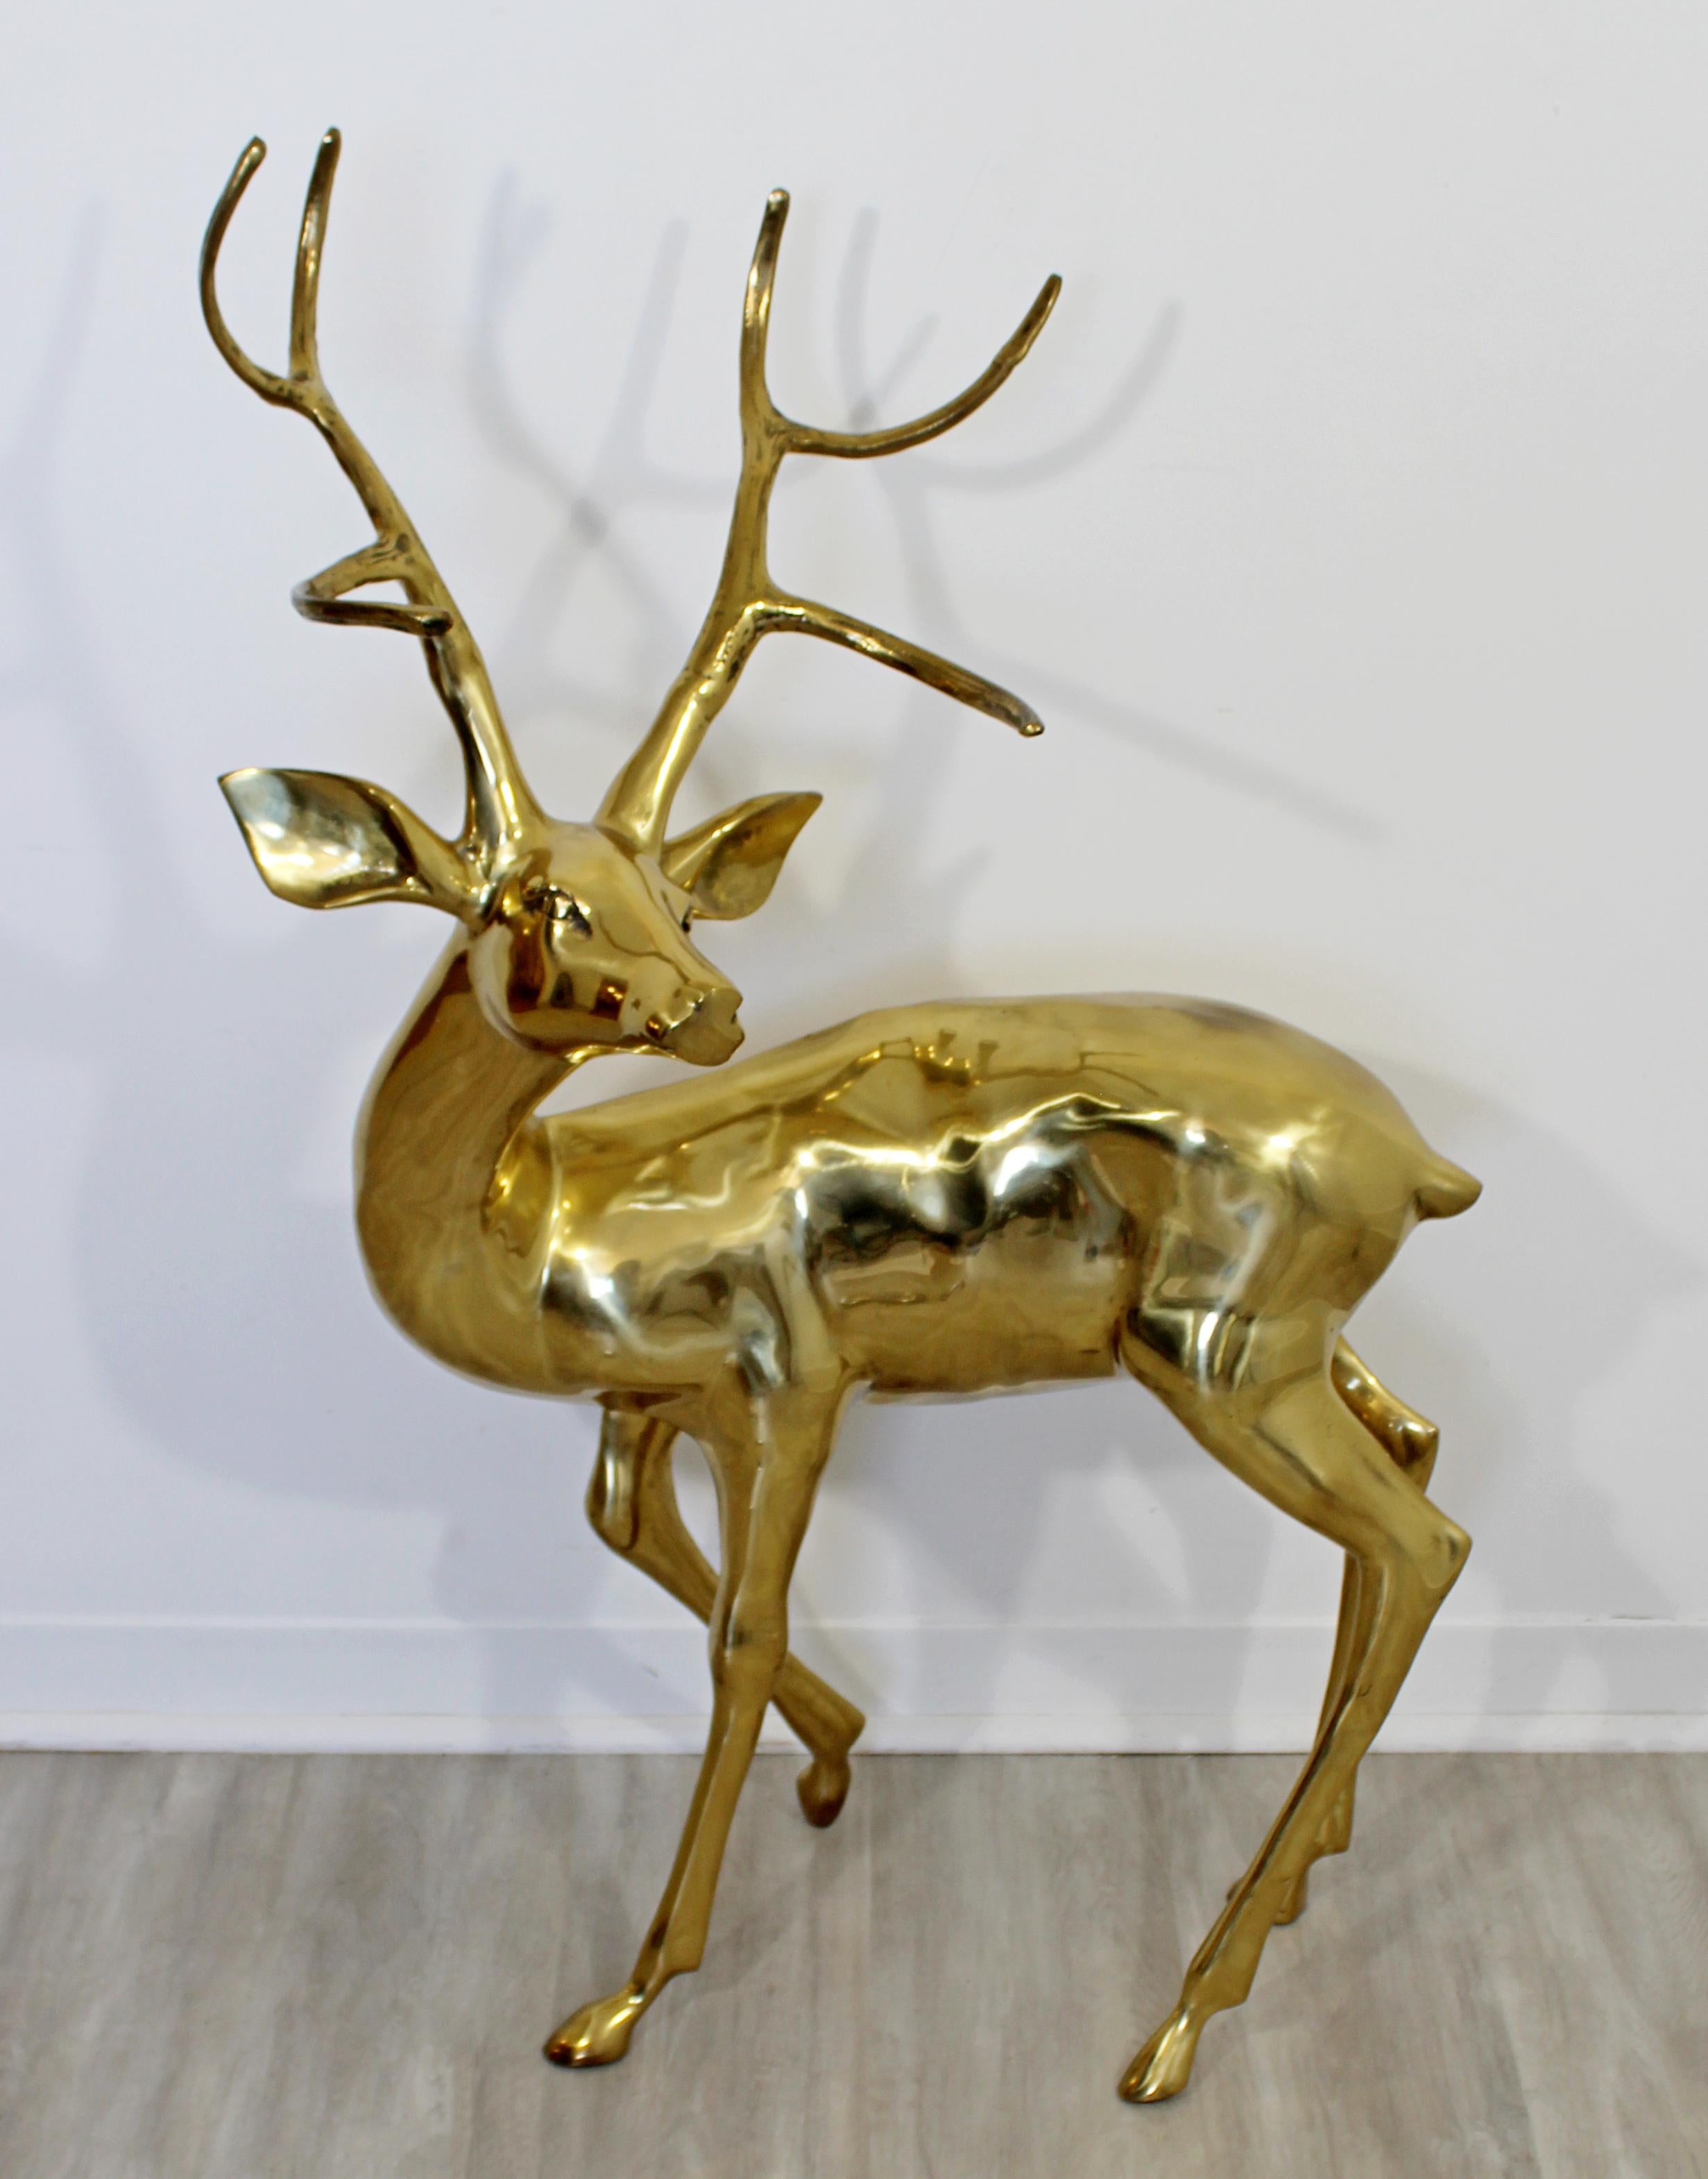 For your consideration is an elegant, brass floor sculpture of a stag with large antlers, circa 1960s. In excellent condition, with a patina to match its age. The dimensions are 25